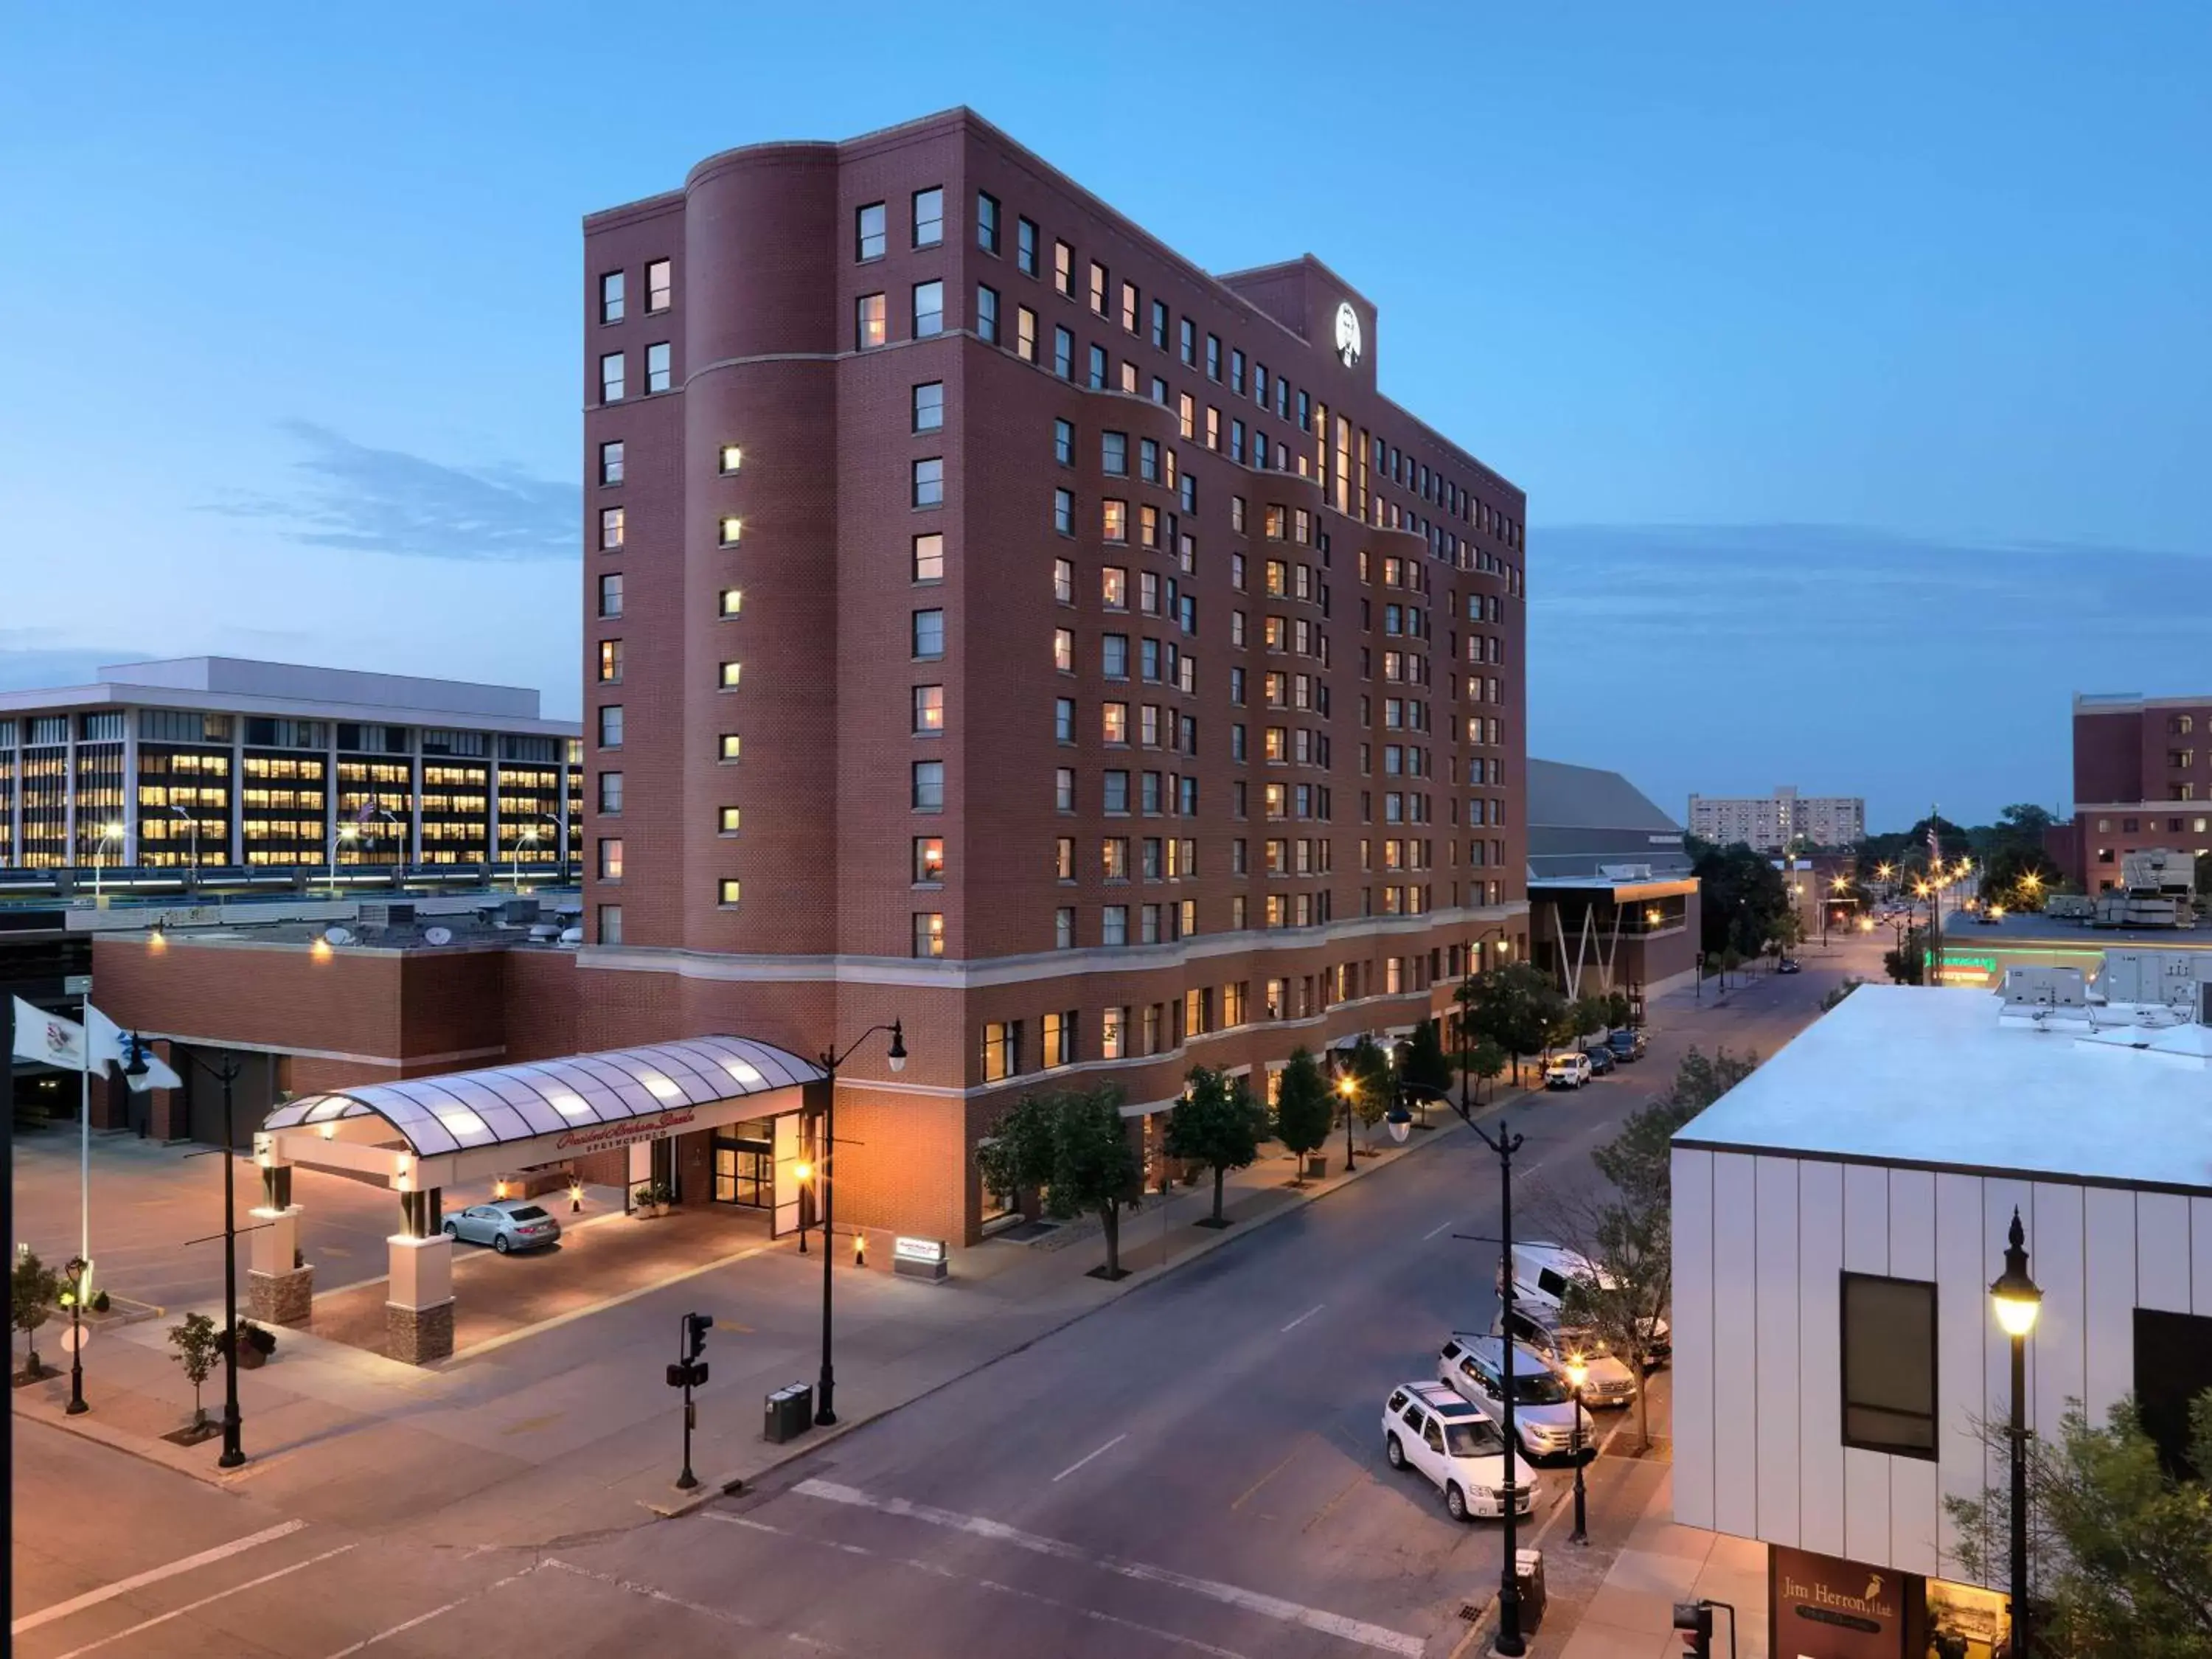 Property building in President Abraham Lincoln - A Doubletree by Hilton Hotel